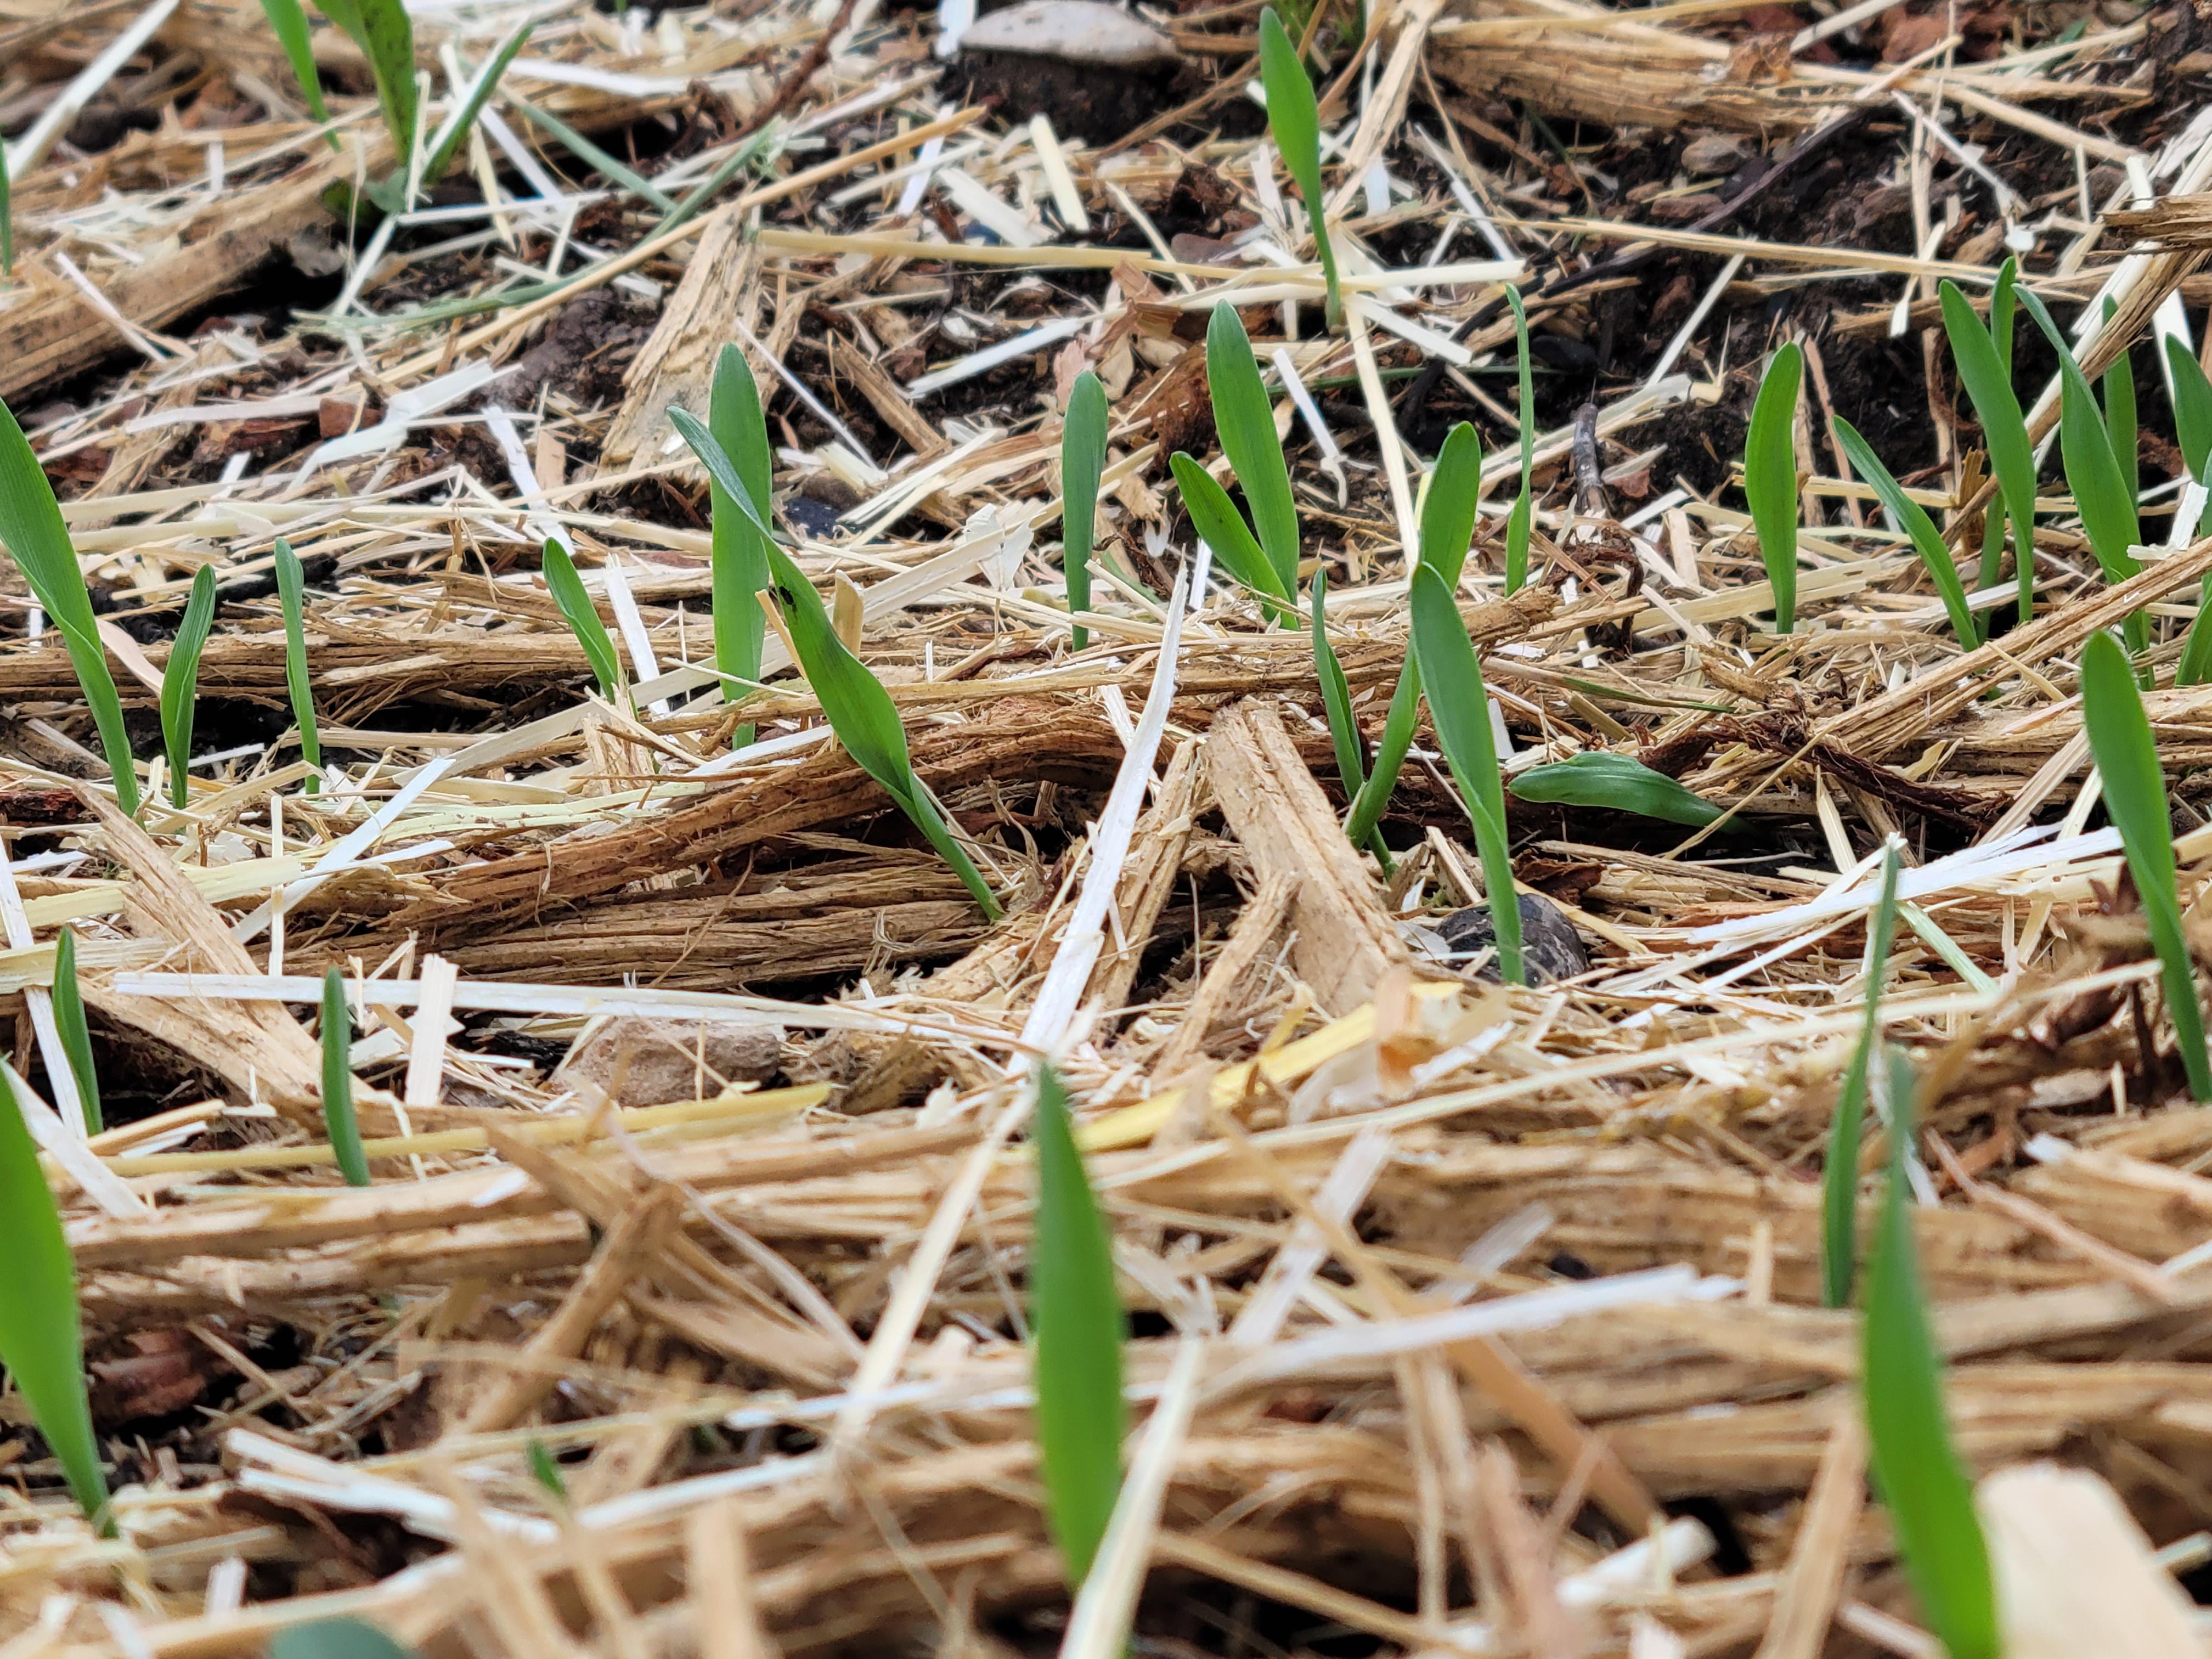 Barley becoming well established ten days after germination with multiple shoots visible across the area